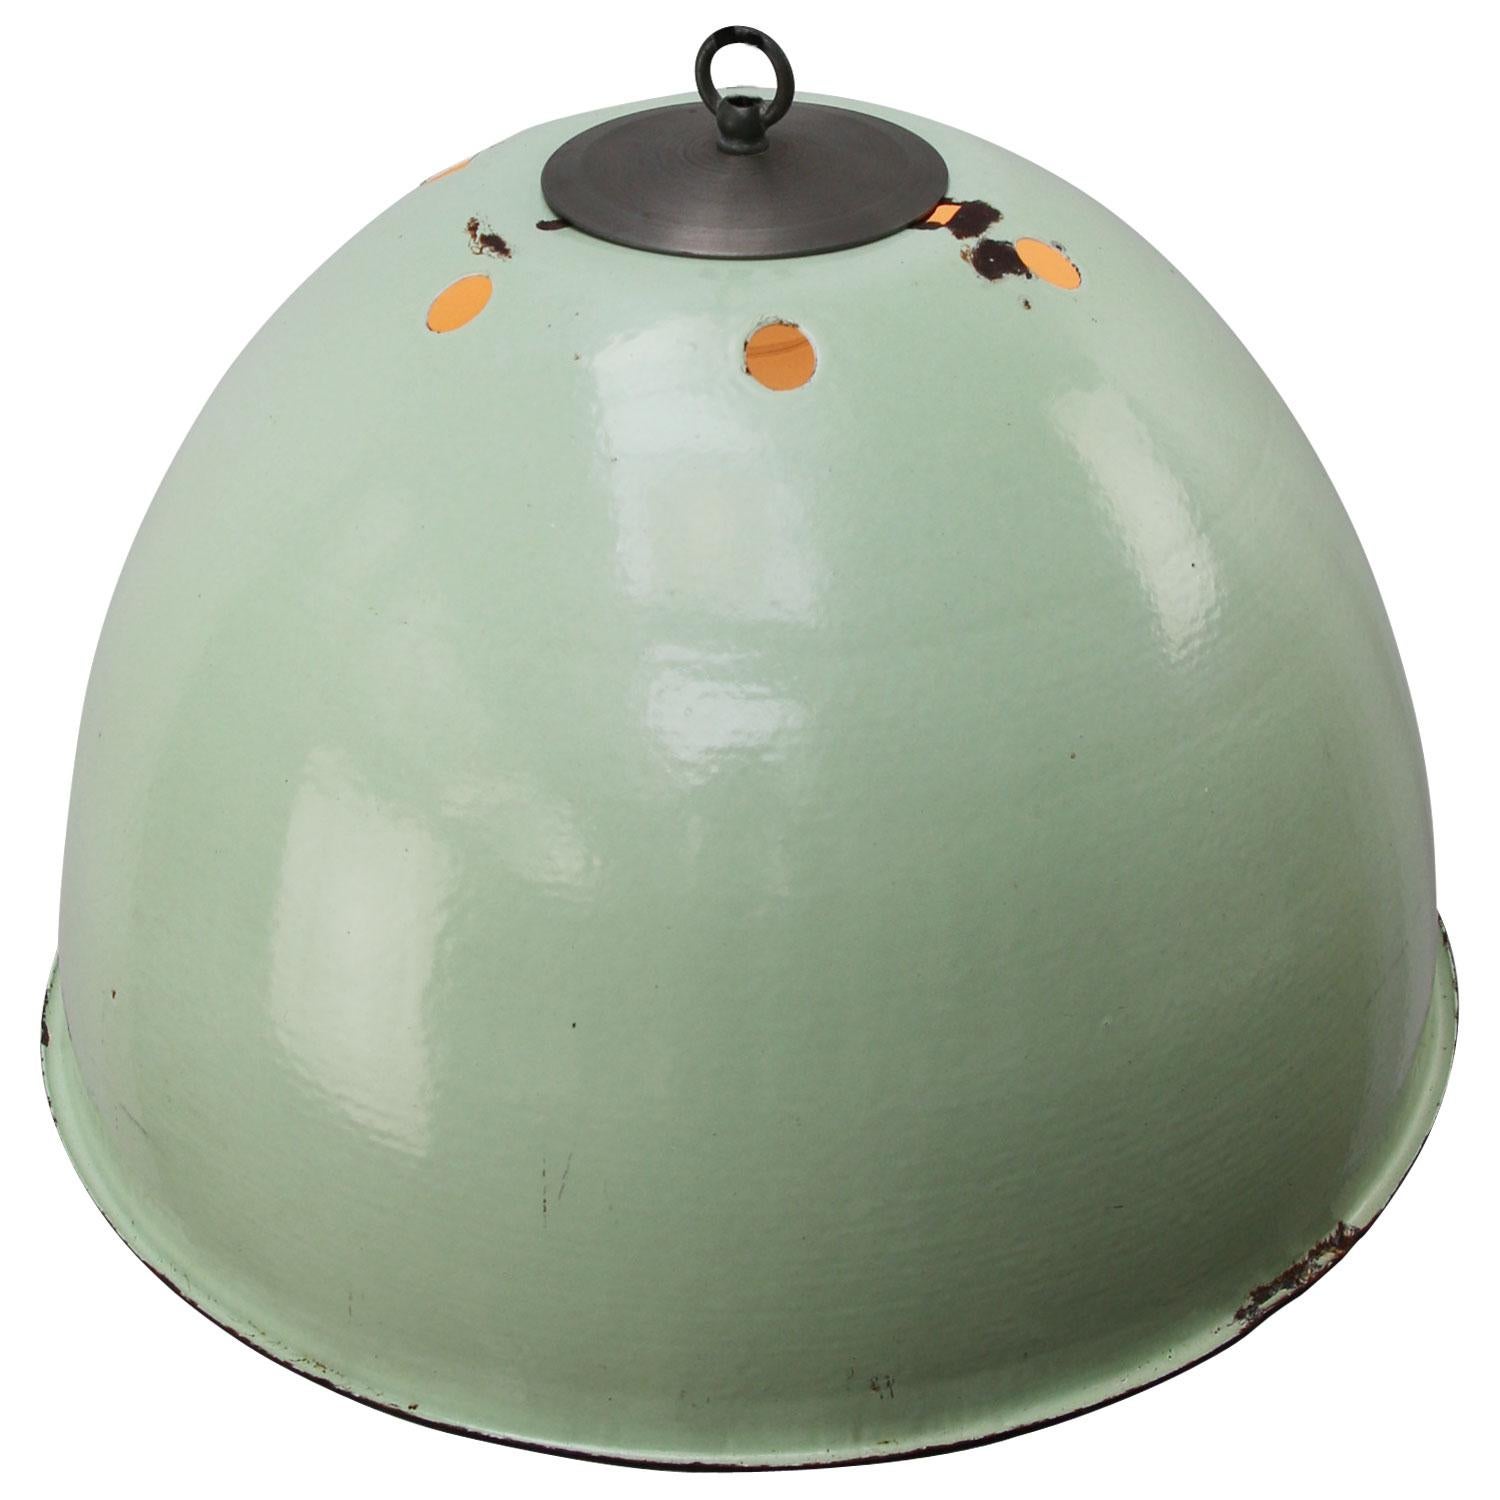 Enamel industrial pendant lamps
Light green enamel shade, white inside.
Metal top.

Weight: 3.60 kg / 7.9 lb

Priced per individual item. All lamps have been made suitable by international standards for incandescent light bulbs,